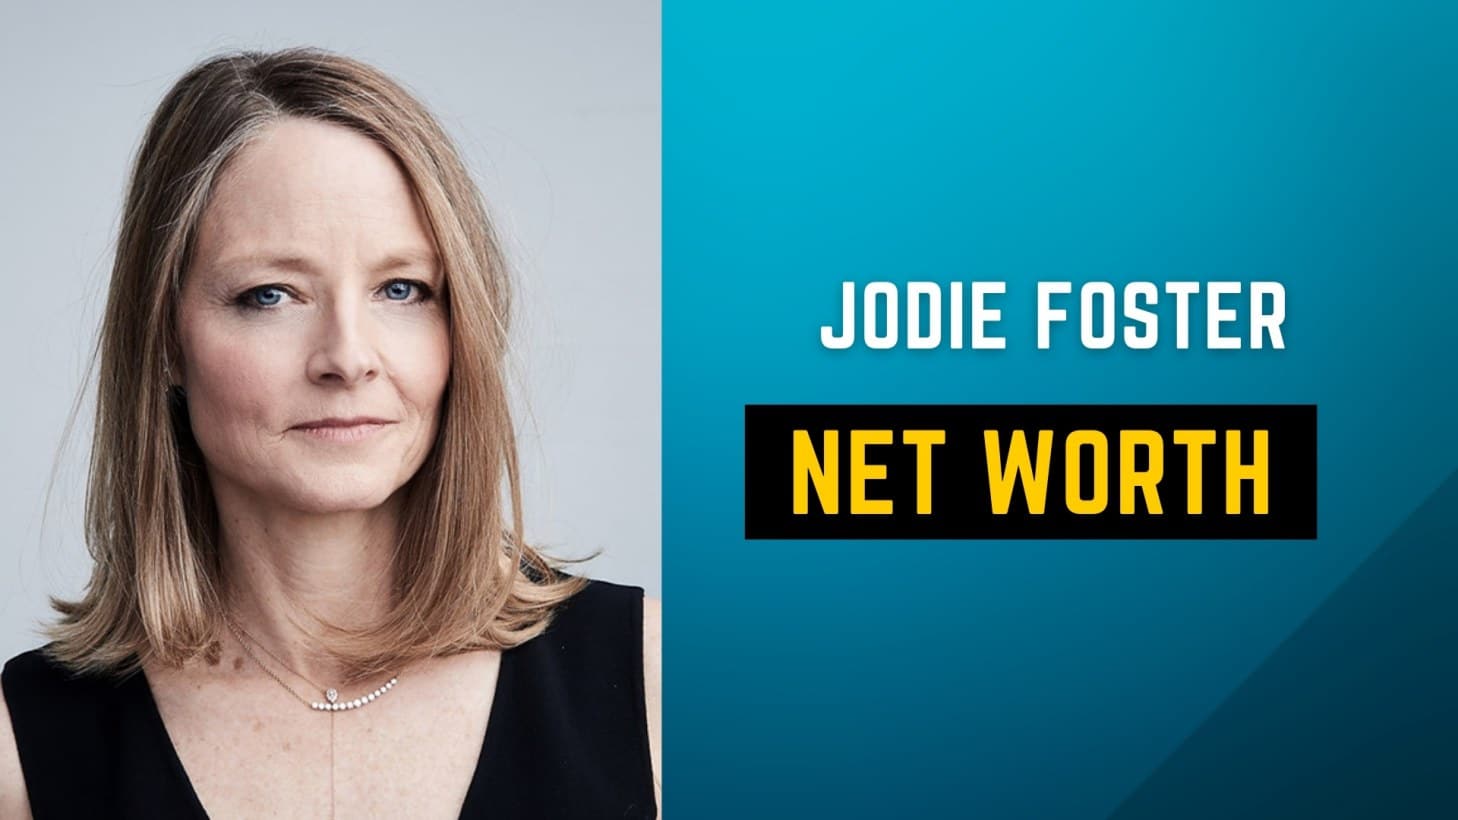 Jodie Foster Net Worth And Earning 2022: Is Jodie Foster from a wealthy family?